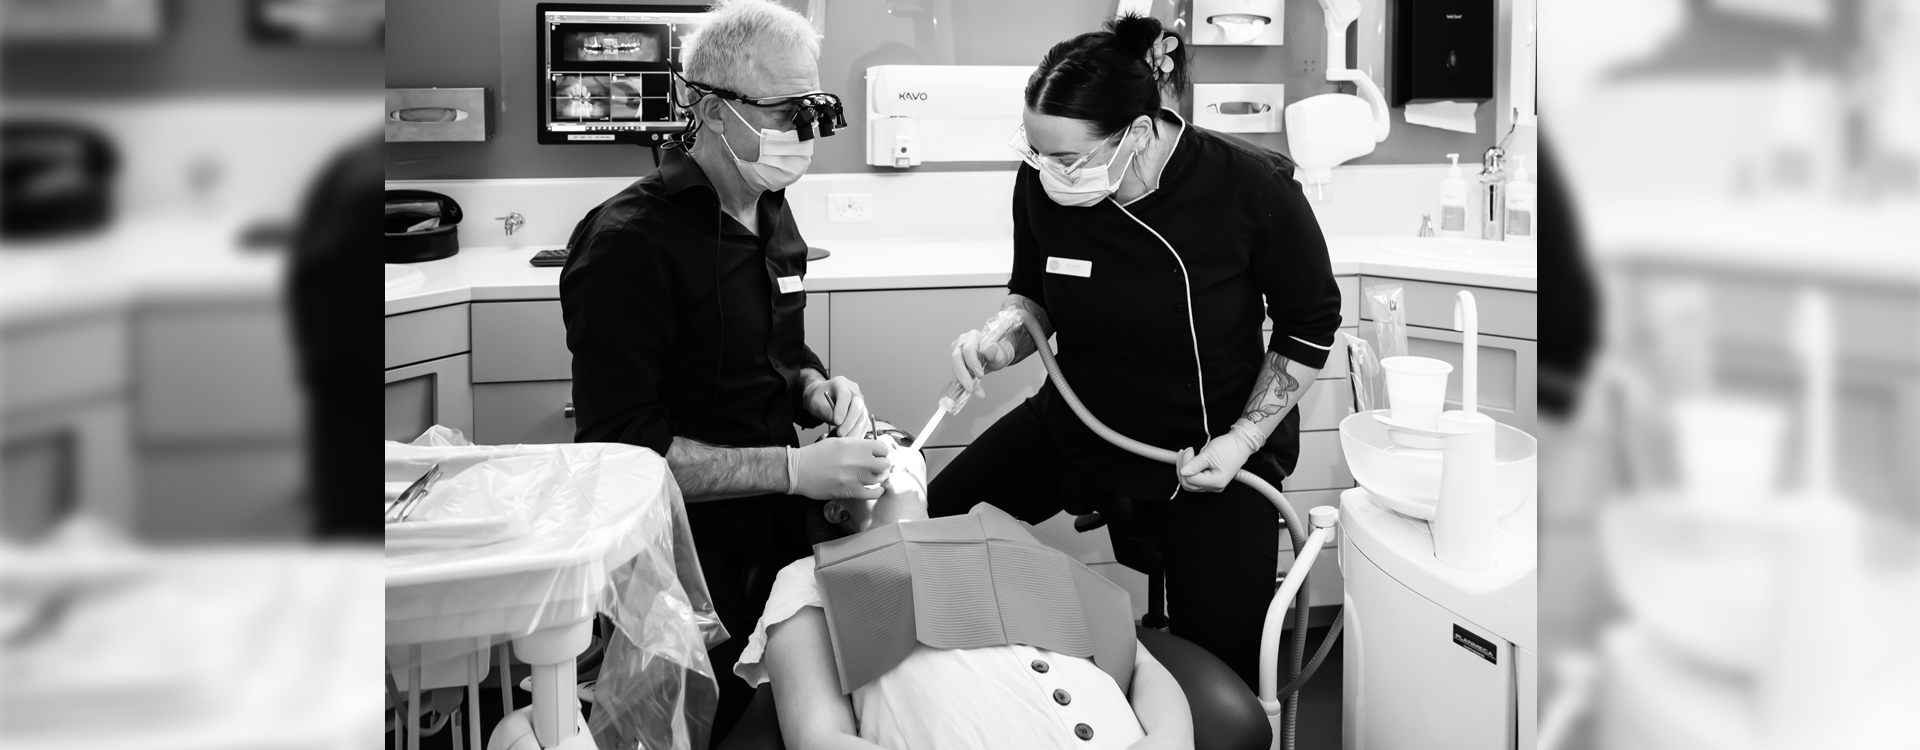 Dr. Paul Gleeson and Dental Hygienist treting a patinet